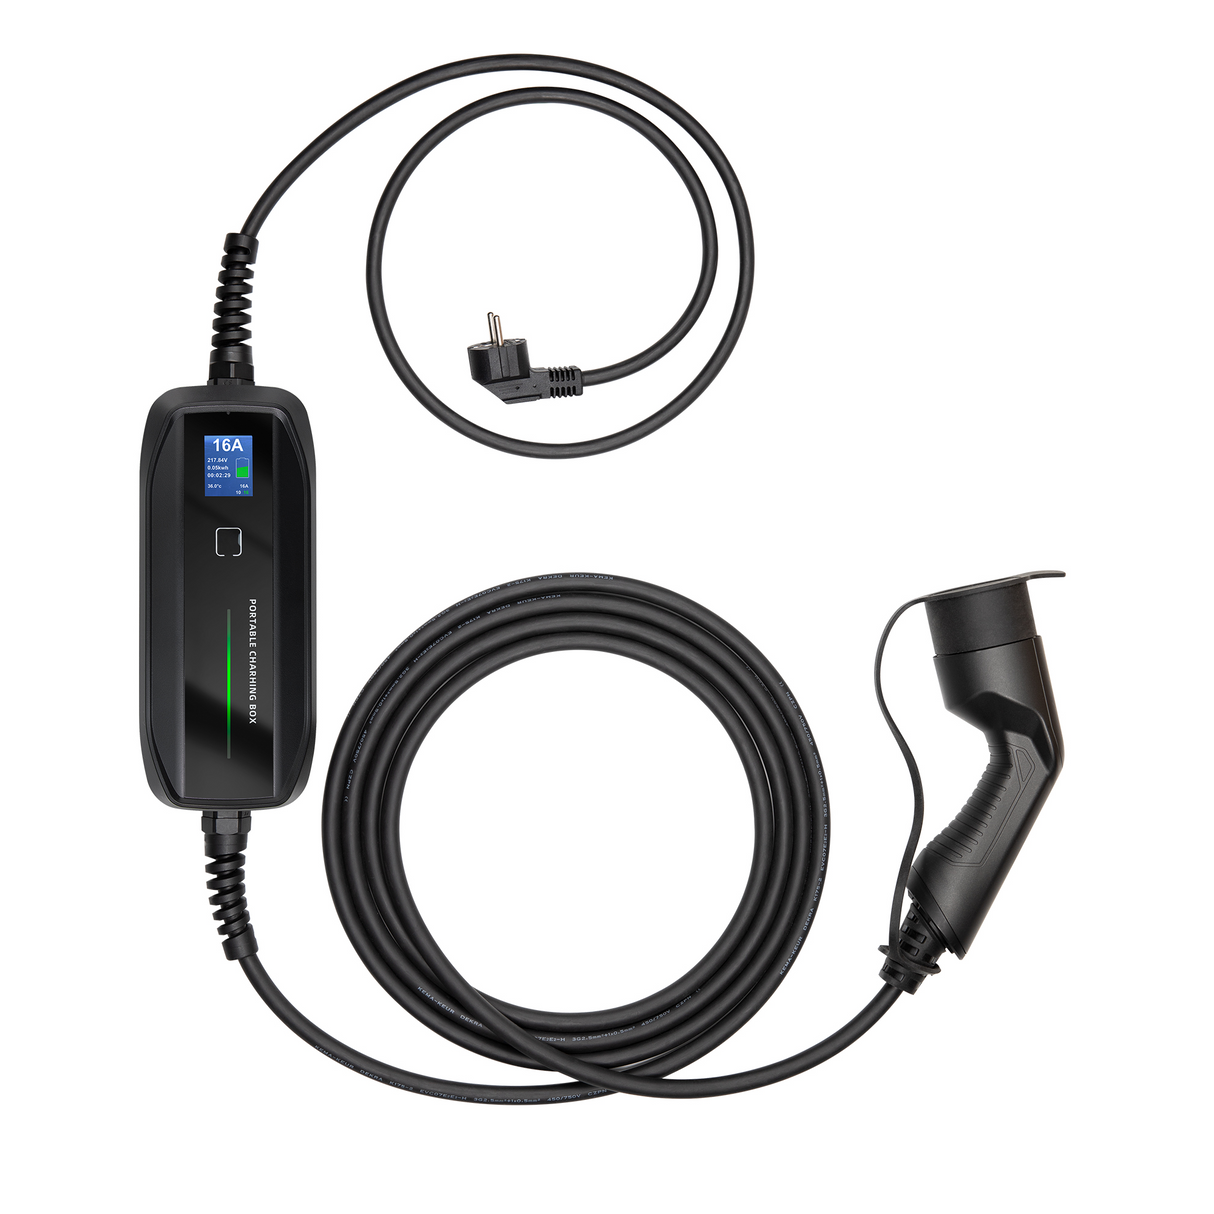 Mobile Charger Volvo C40 - LCD Black Type 2 to Schuko